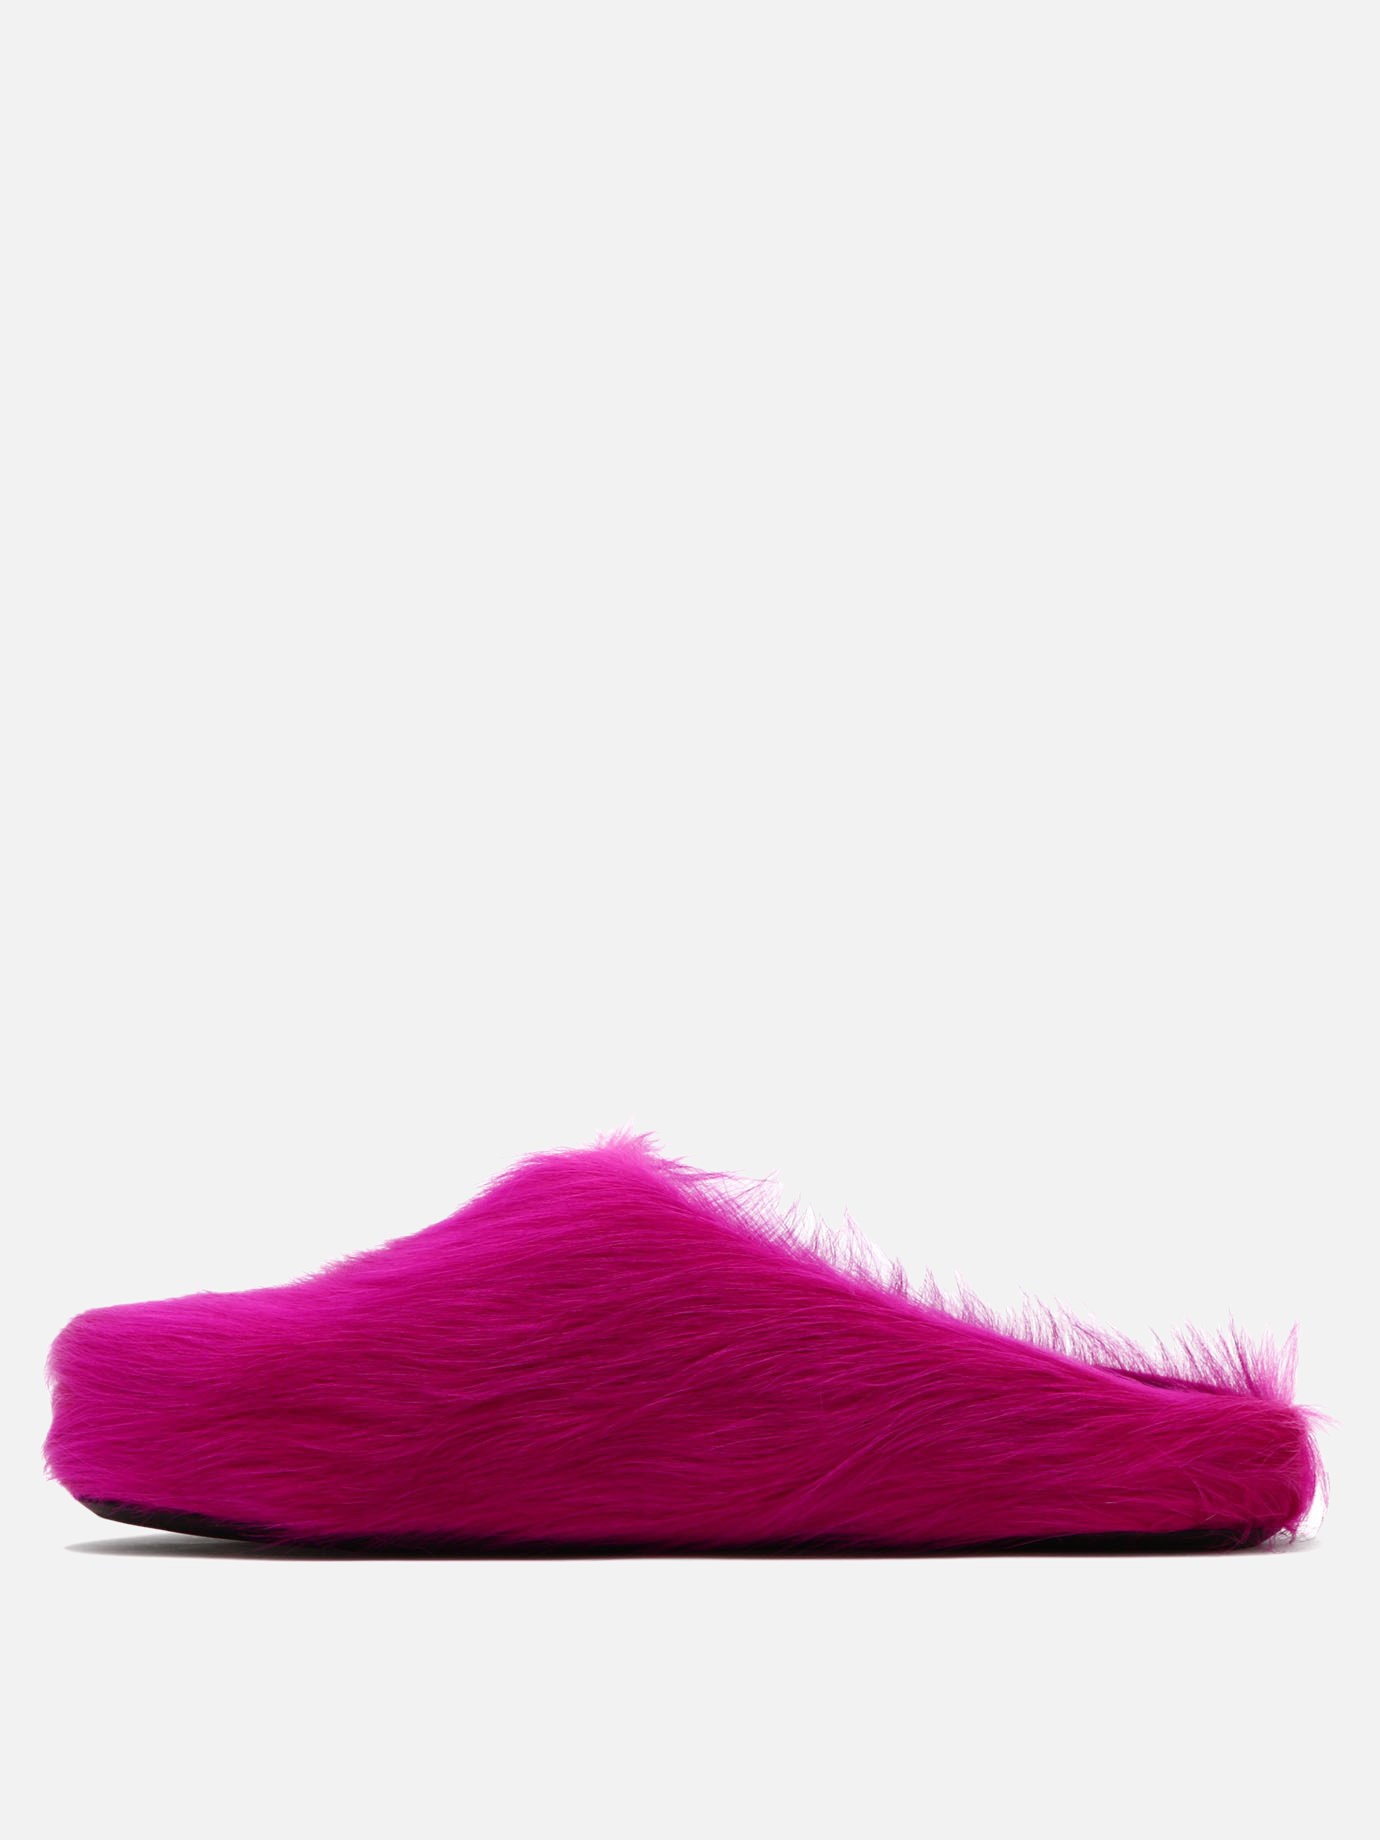  Fussbet  slippers by Marni